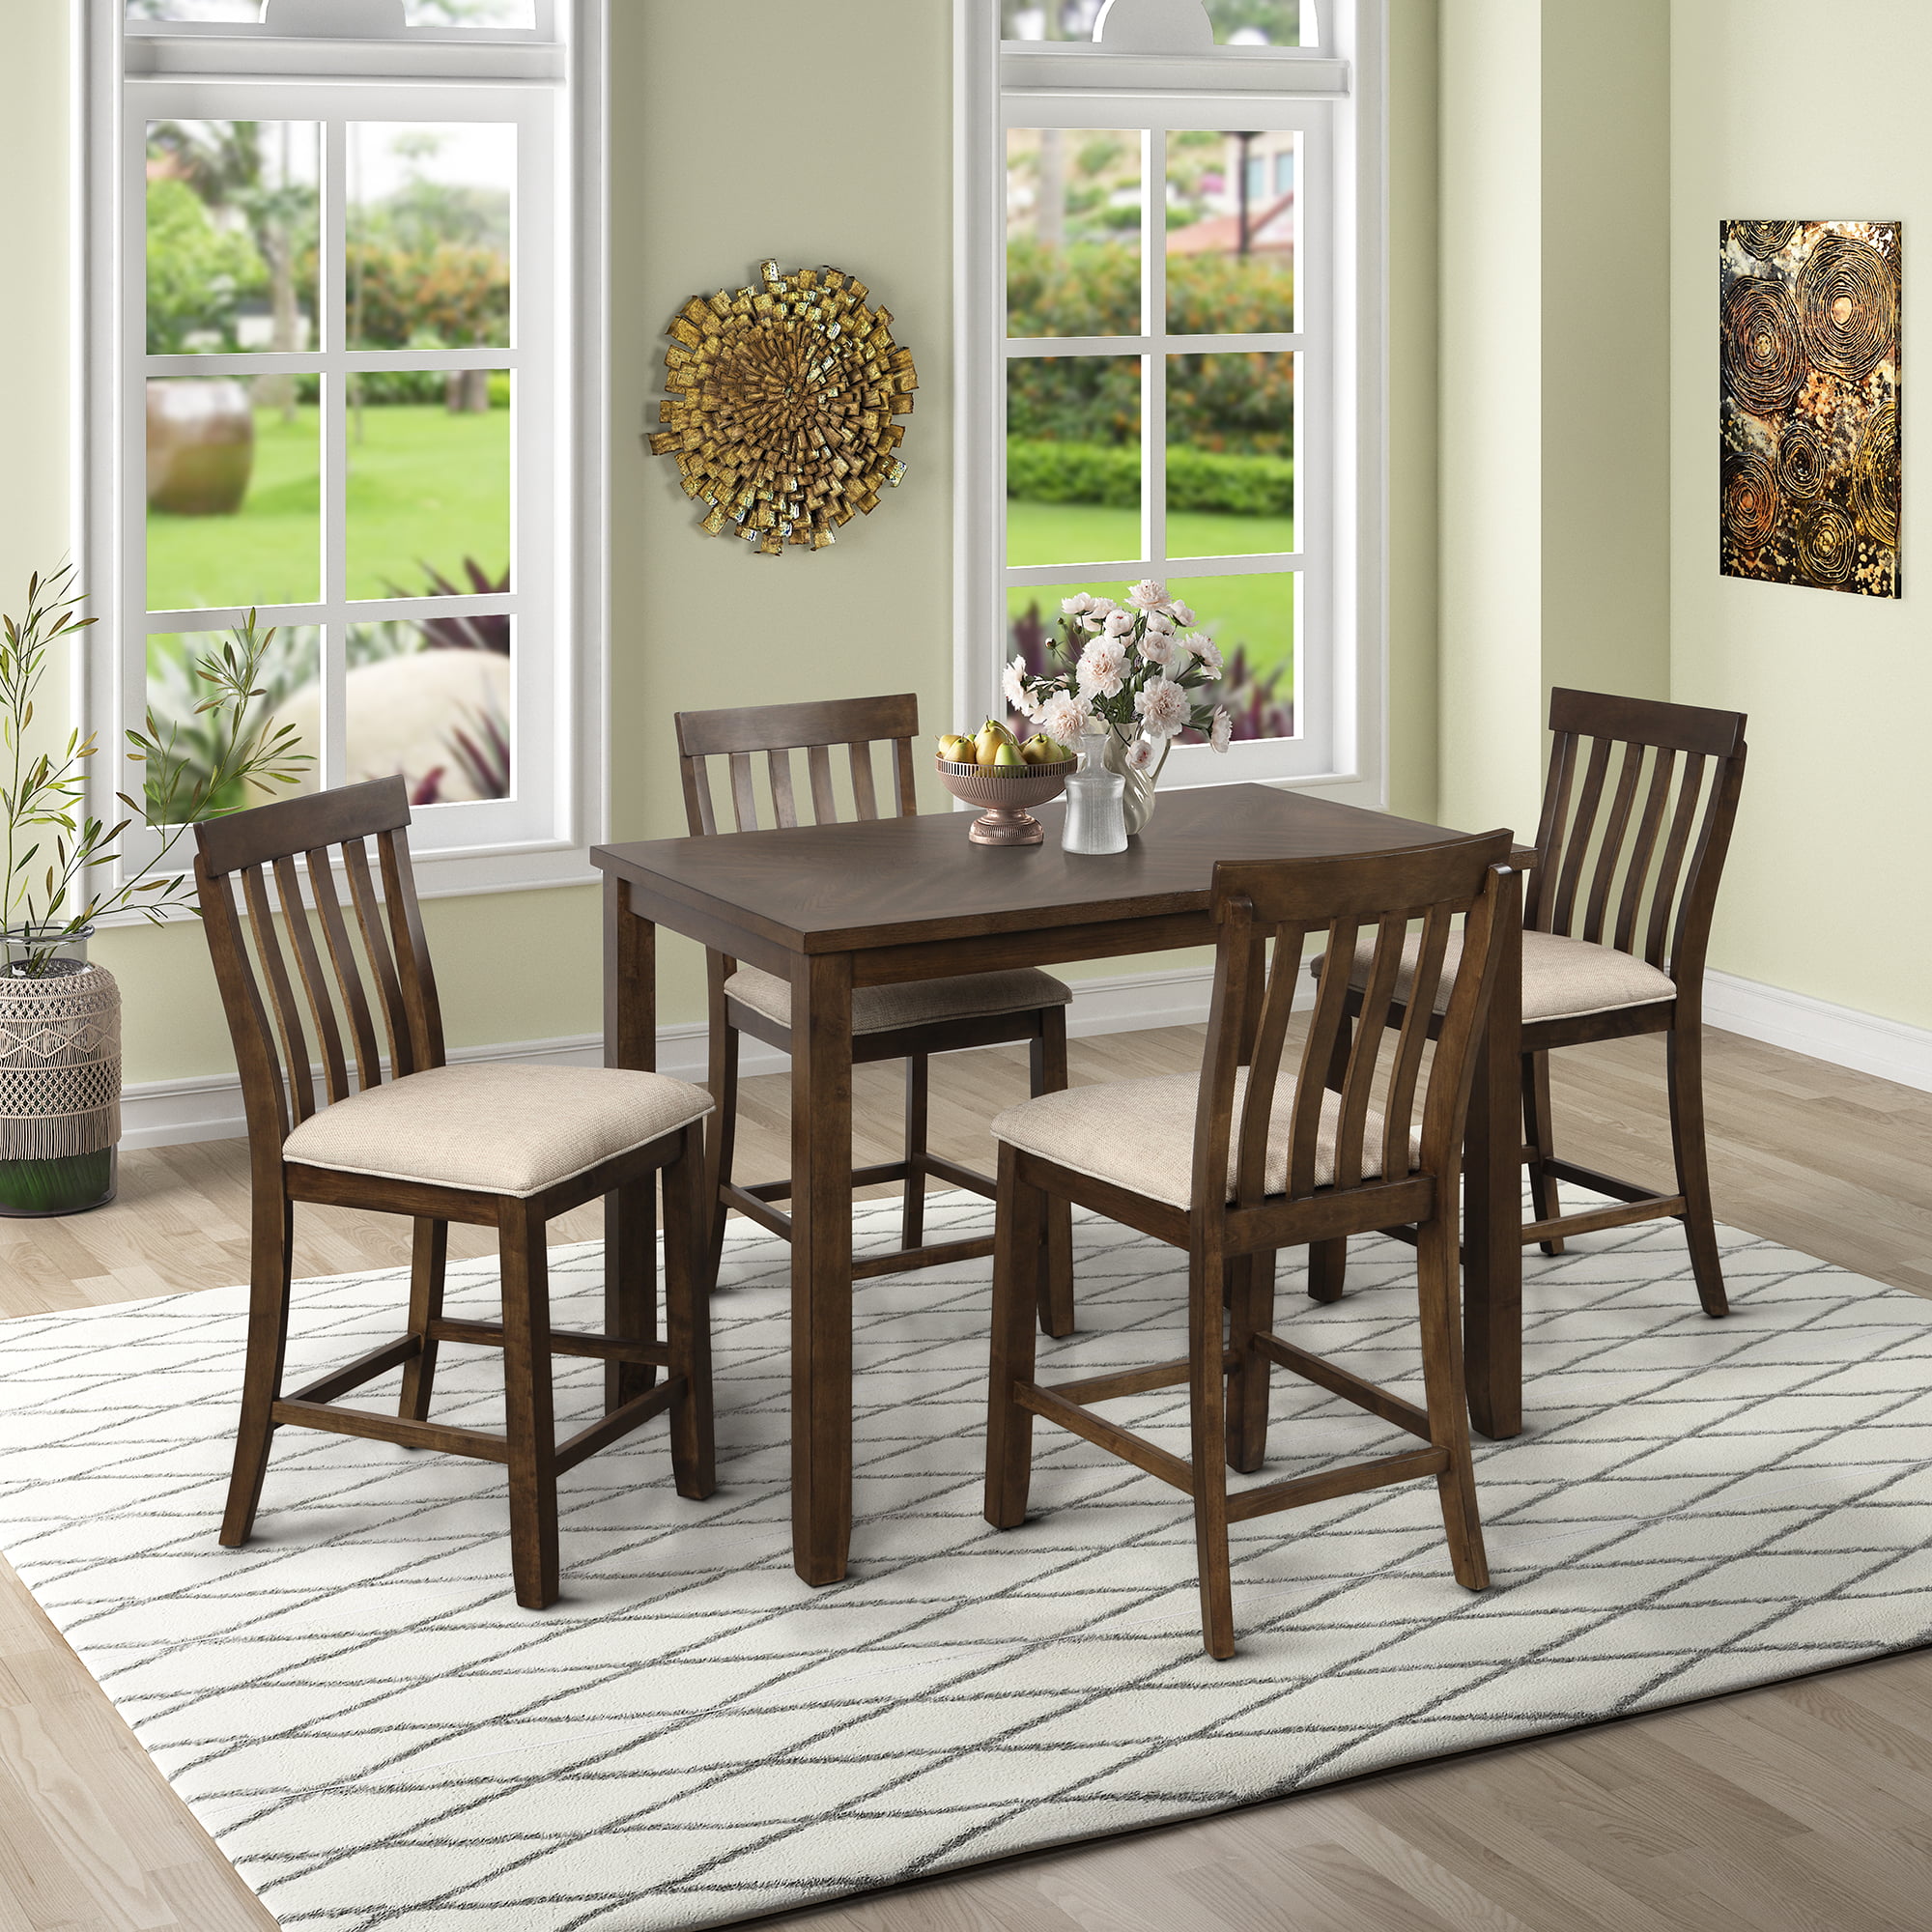 5 Piece Counter Height Dining Set Btmway Wood Kitchen Dining Room Table And Chairs Set Contemporary Pub Bar Table Set With 4 Stools High Top Breakfast Nook Kitchen Bistro Dining Furniture Set A50